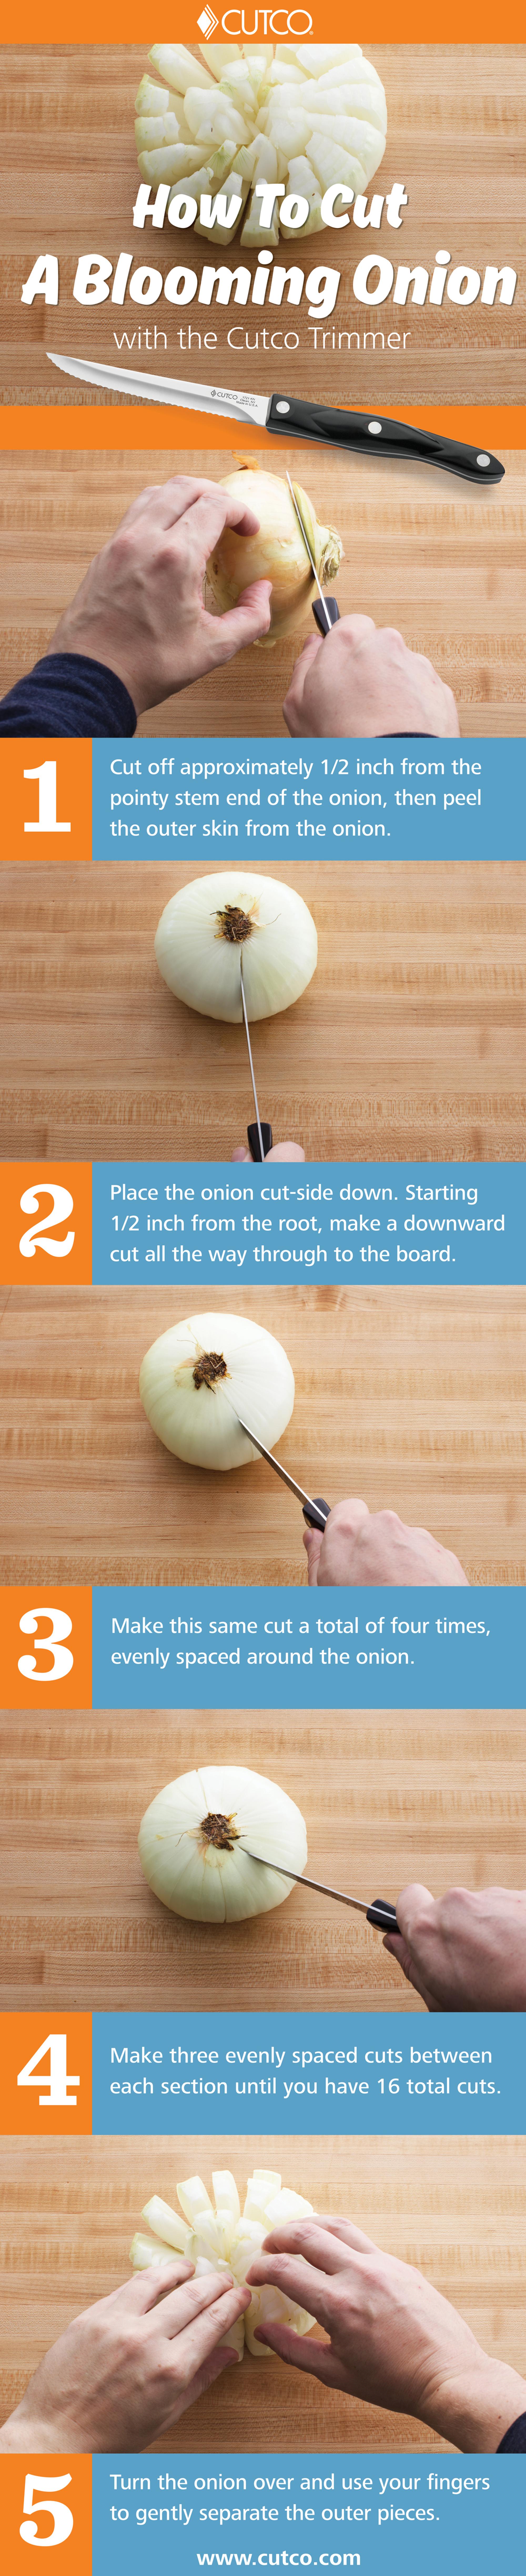 How to cut a blooming onion infograph.